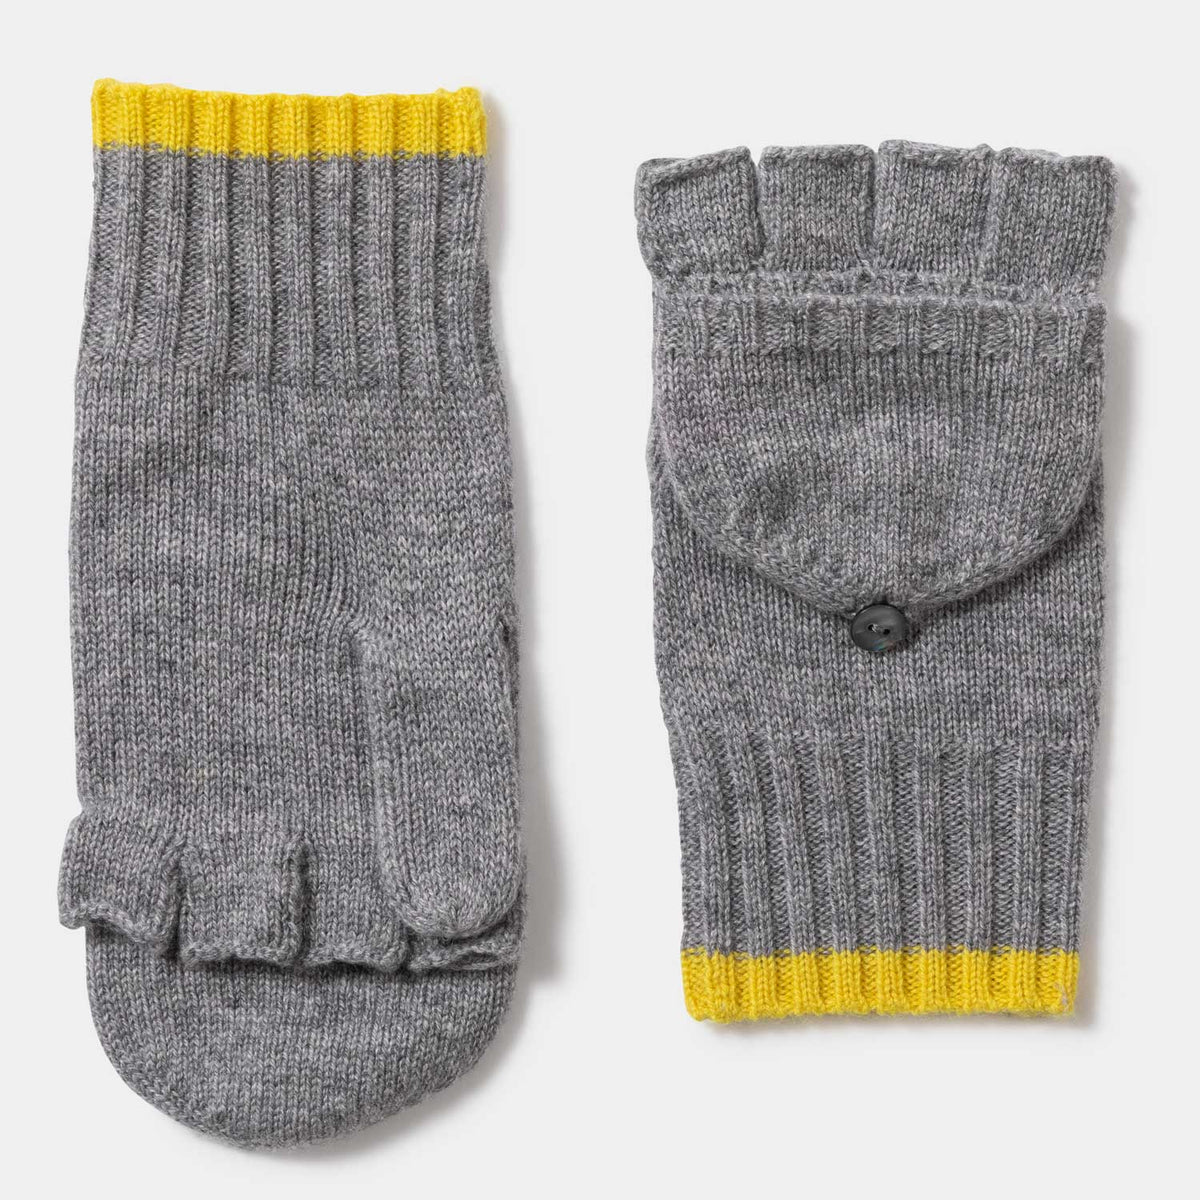 Picture of knit cashmere pop top glove, contrast color at cuff, grey and yellow.